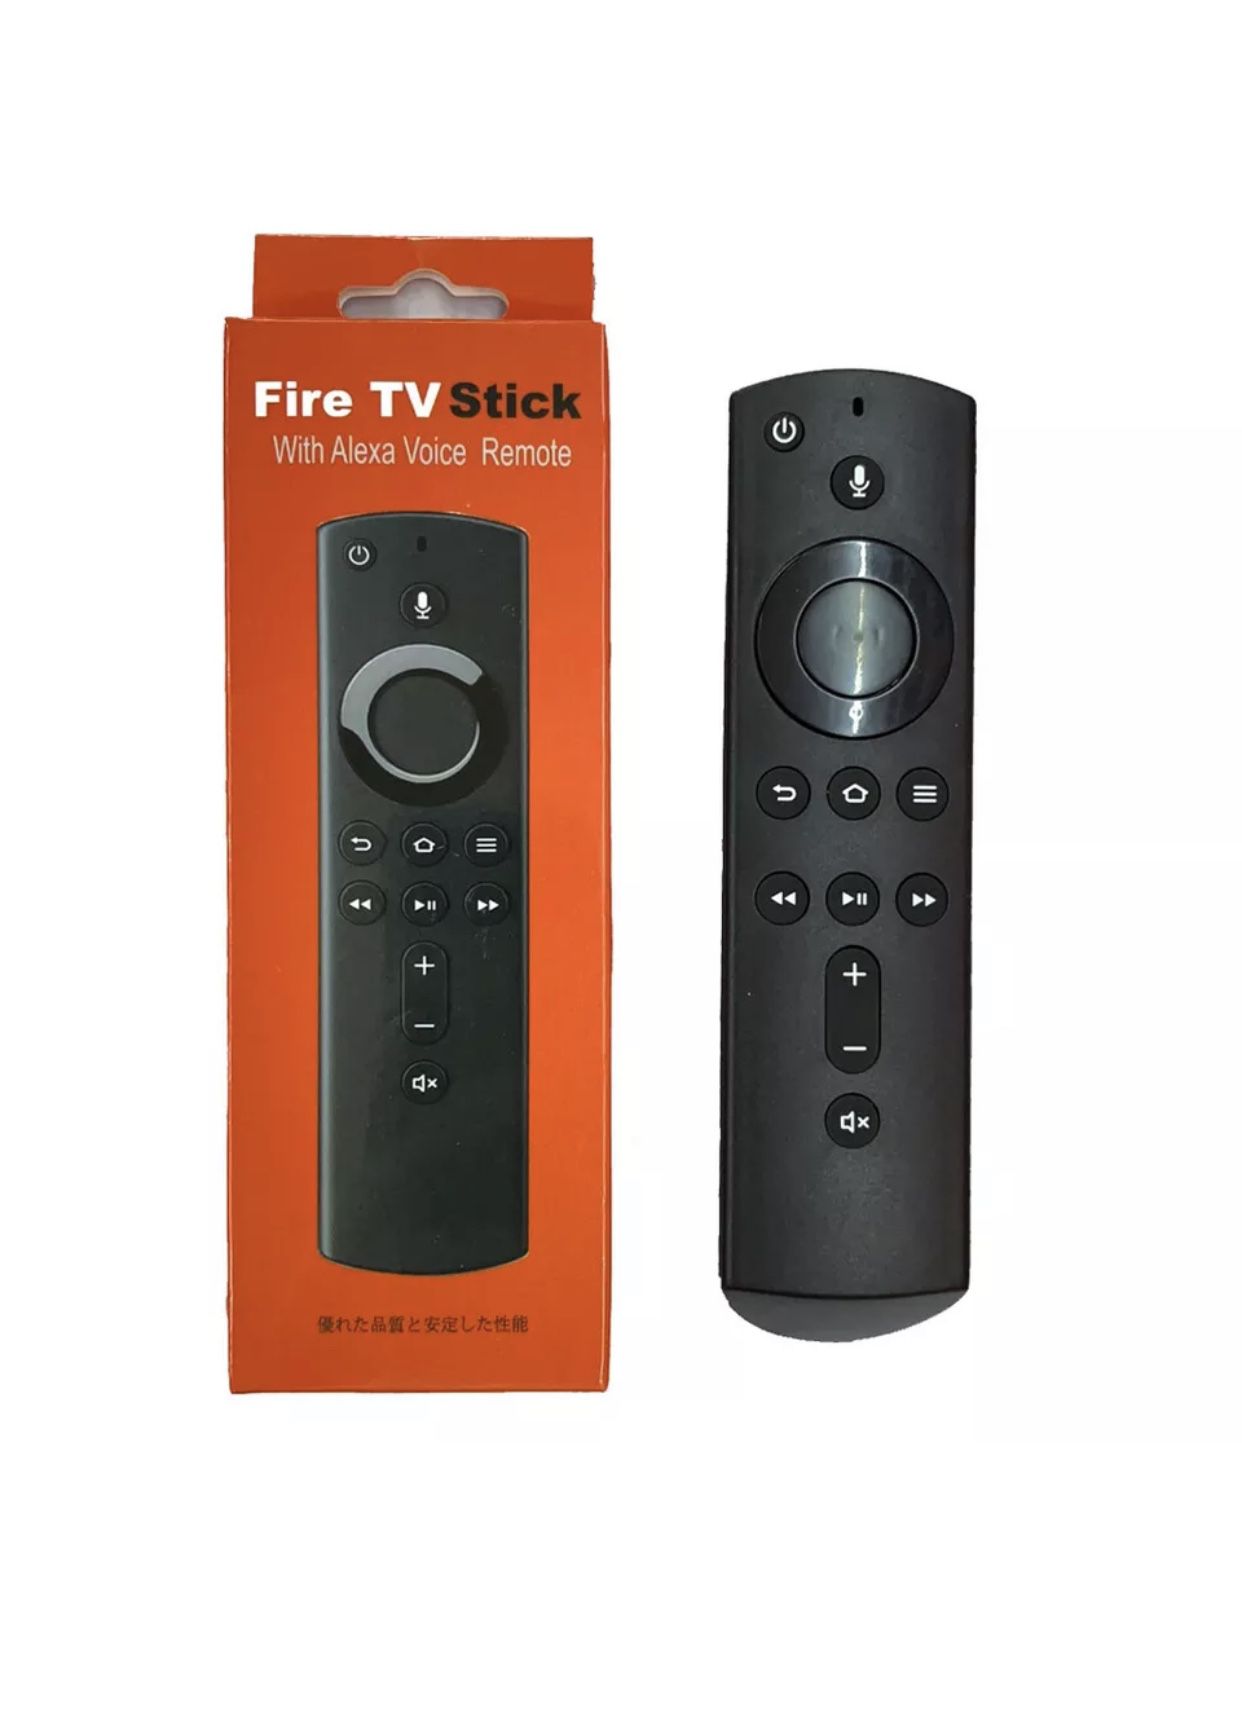 New L5B83H For Amazon 2nd Gen Fire TV Stick 4K Remote Control With Alexa Voice